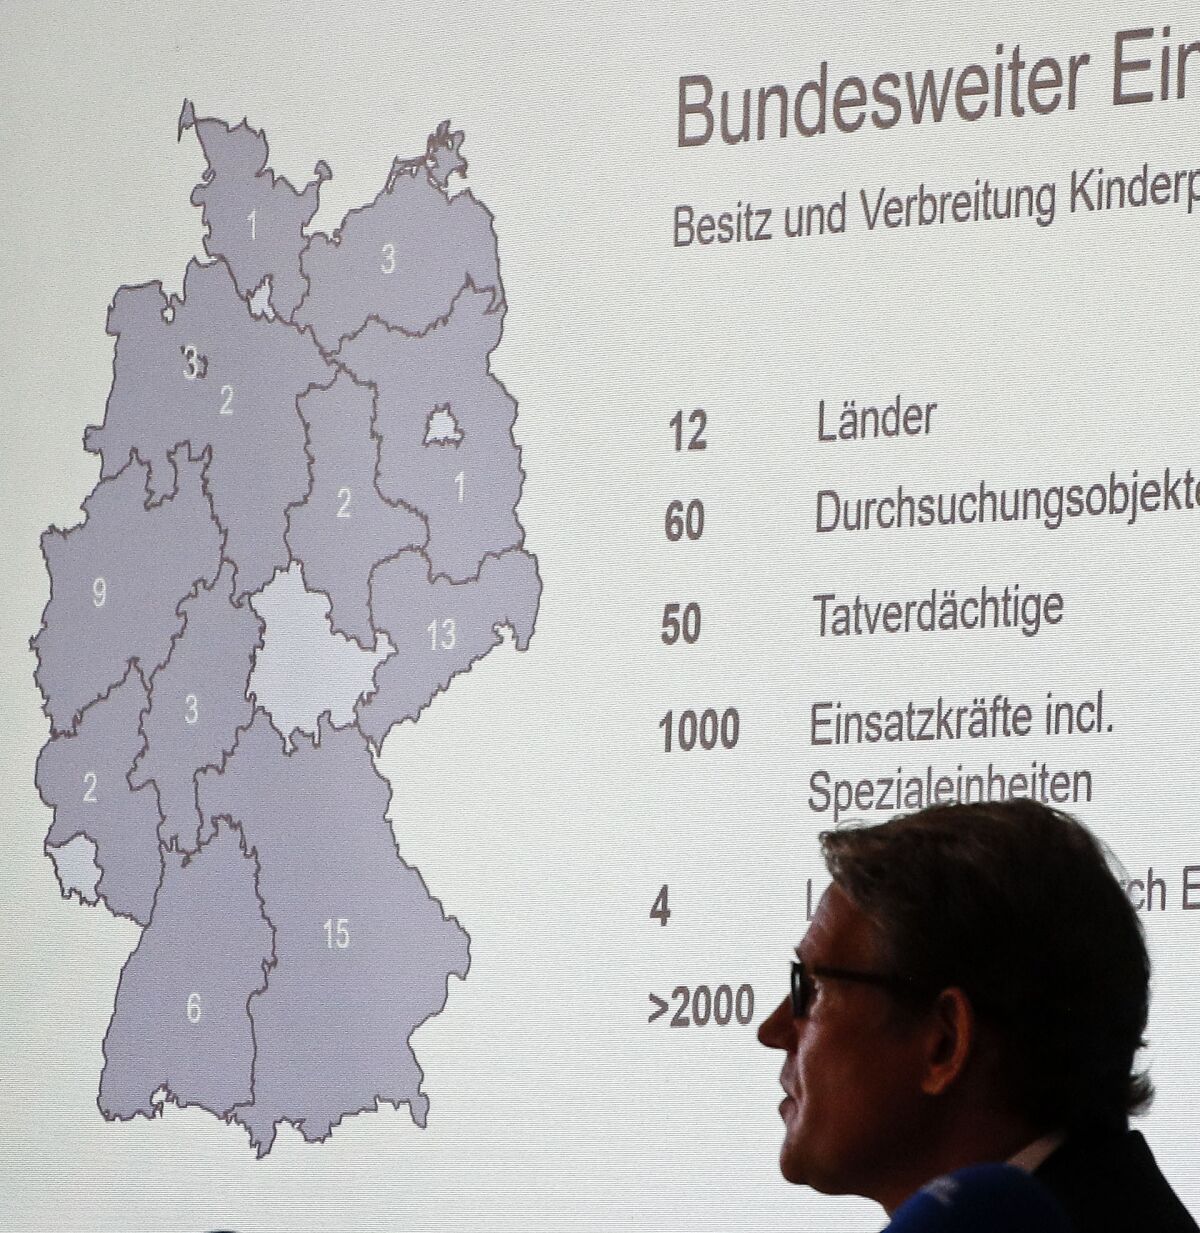 A map of Germany shows the number of raid places at a press conference at the police department in Cologne, Germany, about nationwide child pornography raids, Wednesday, Sept. 2, 2020. Special police units, coordinated by the Cologne Prosecutor's Office, have raided 60 places across Germany yesterday, linked to an ongoing investigation that started last year in the city of Bergisch Gladbach. (AP Photo/Martin Meissner)